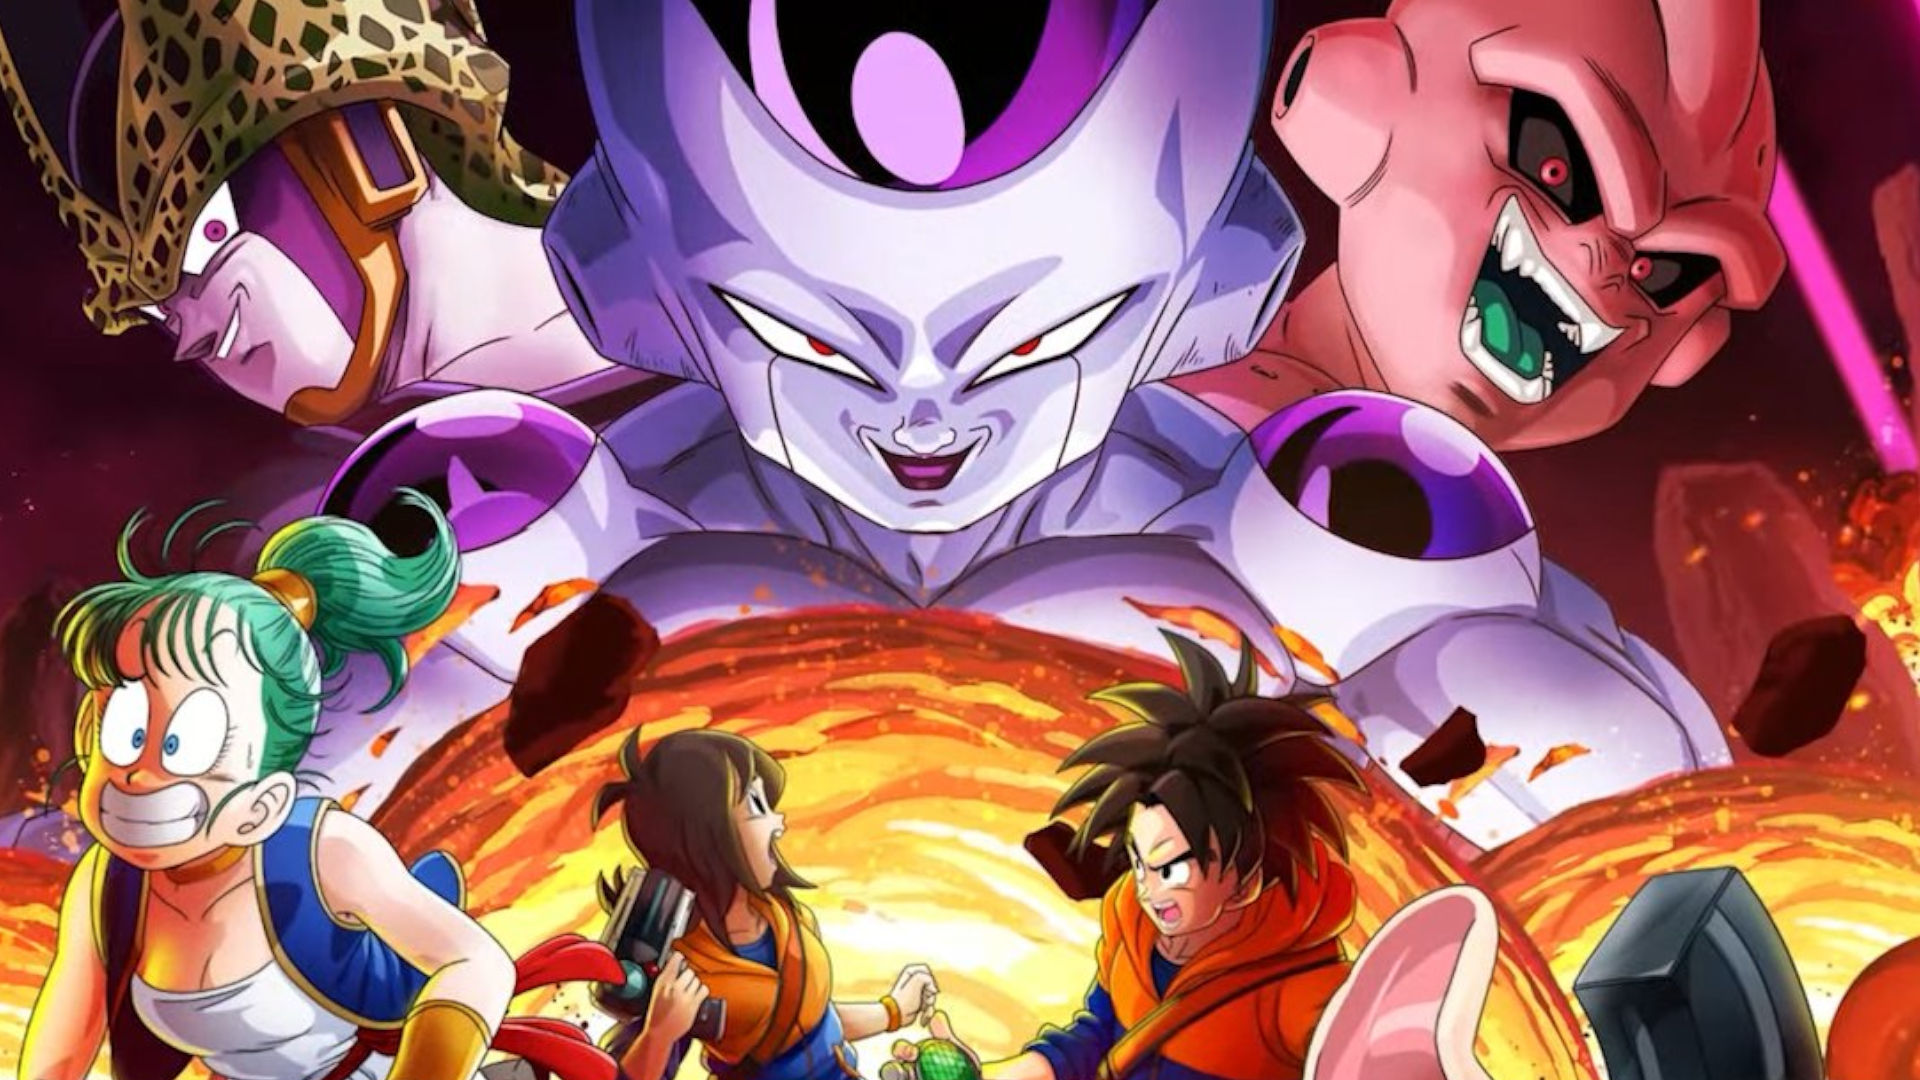 DRAGON BALL: THE BREAKERS – Closed Beta Test Information Announcement 